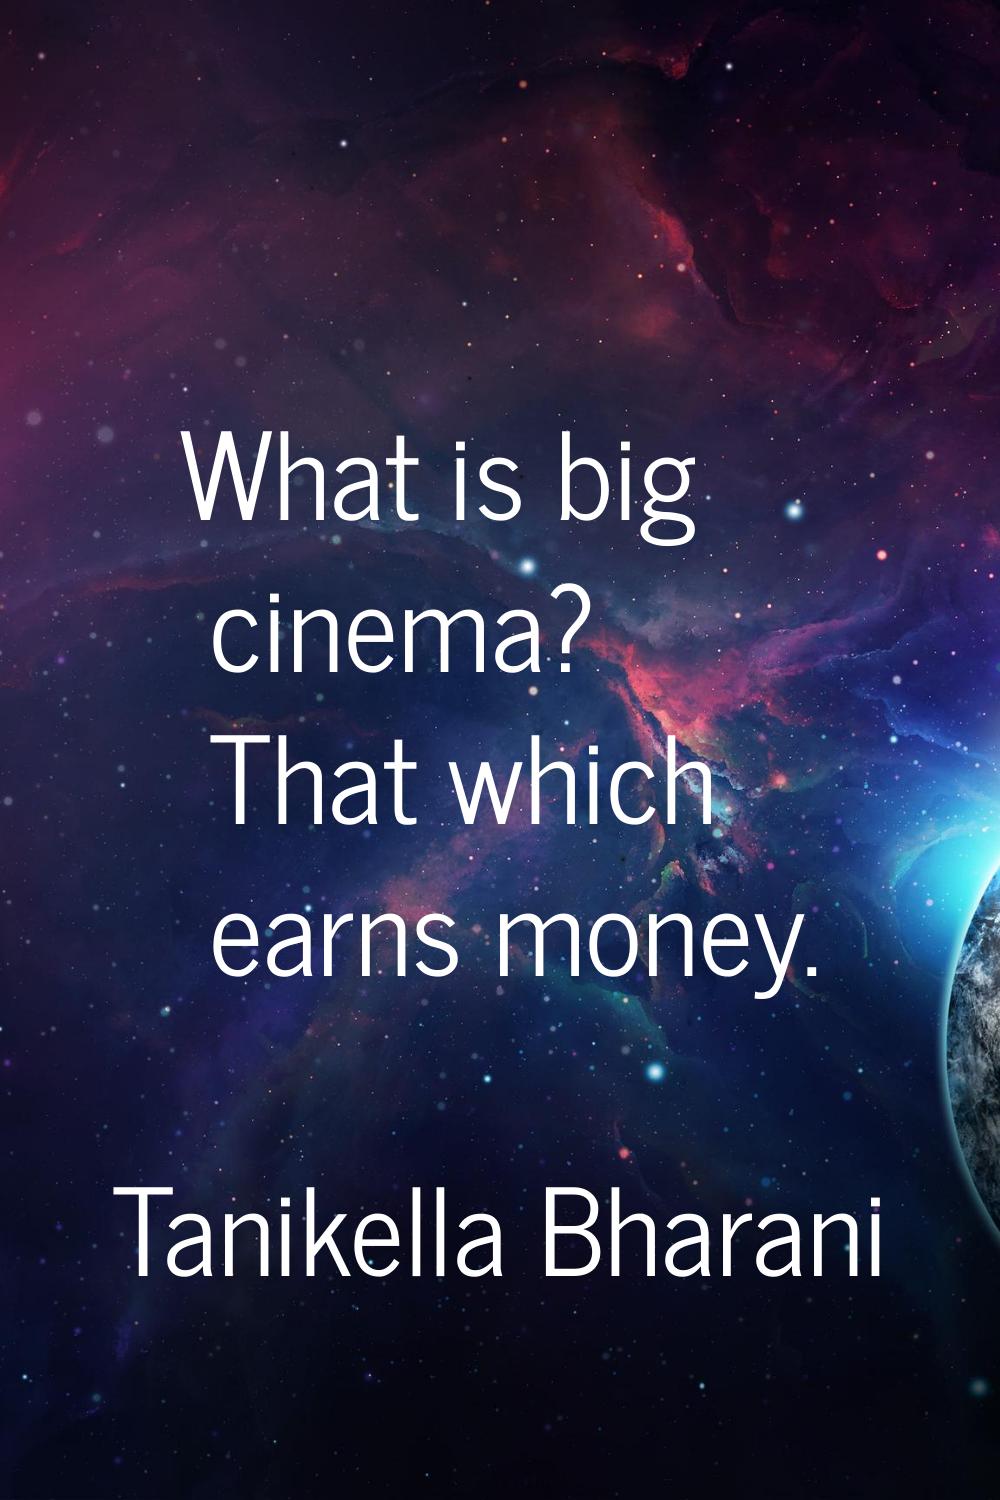 What is big cinema? That which earns money.